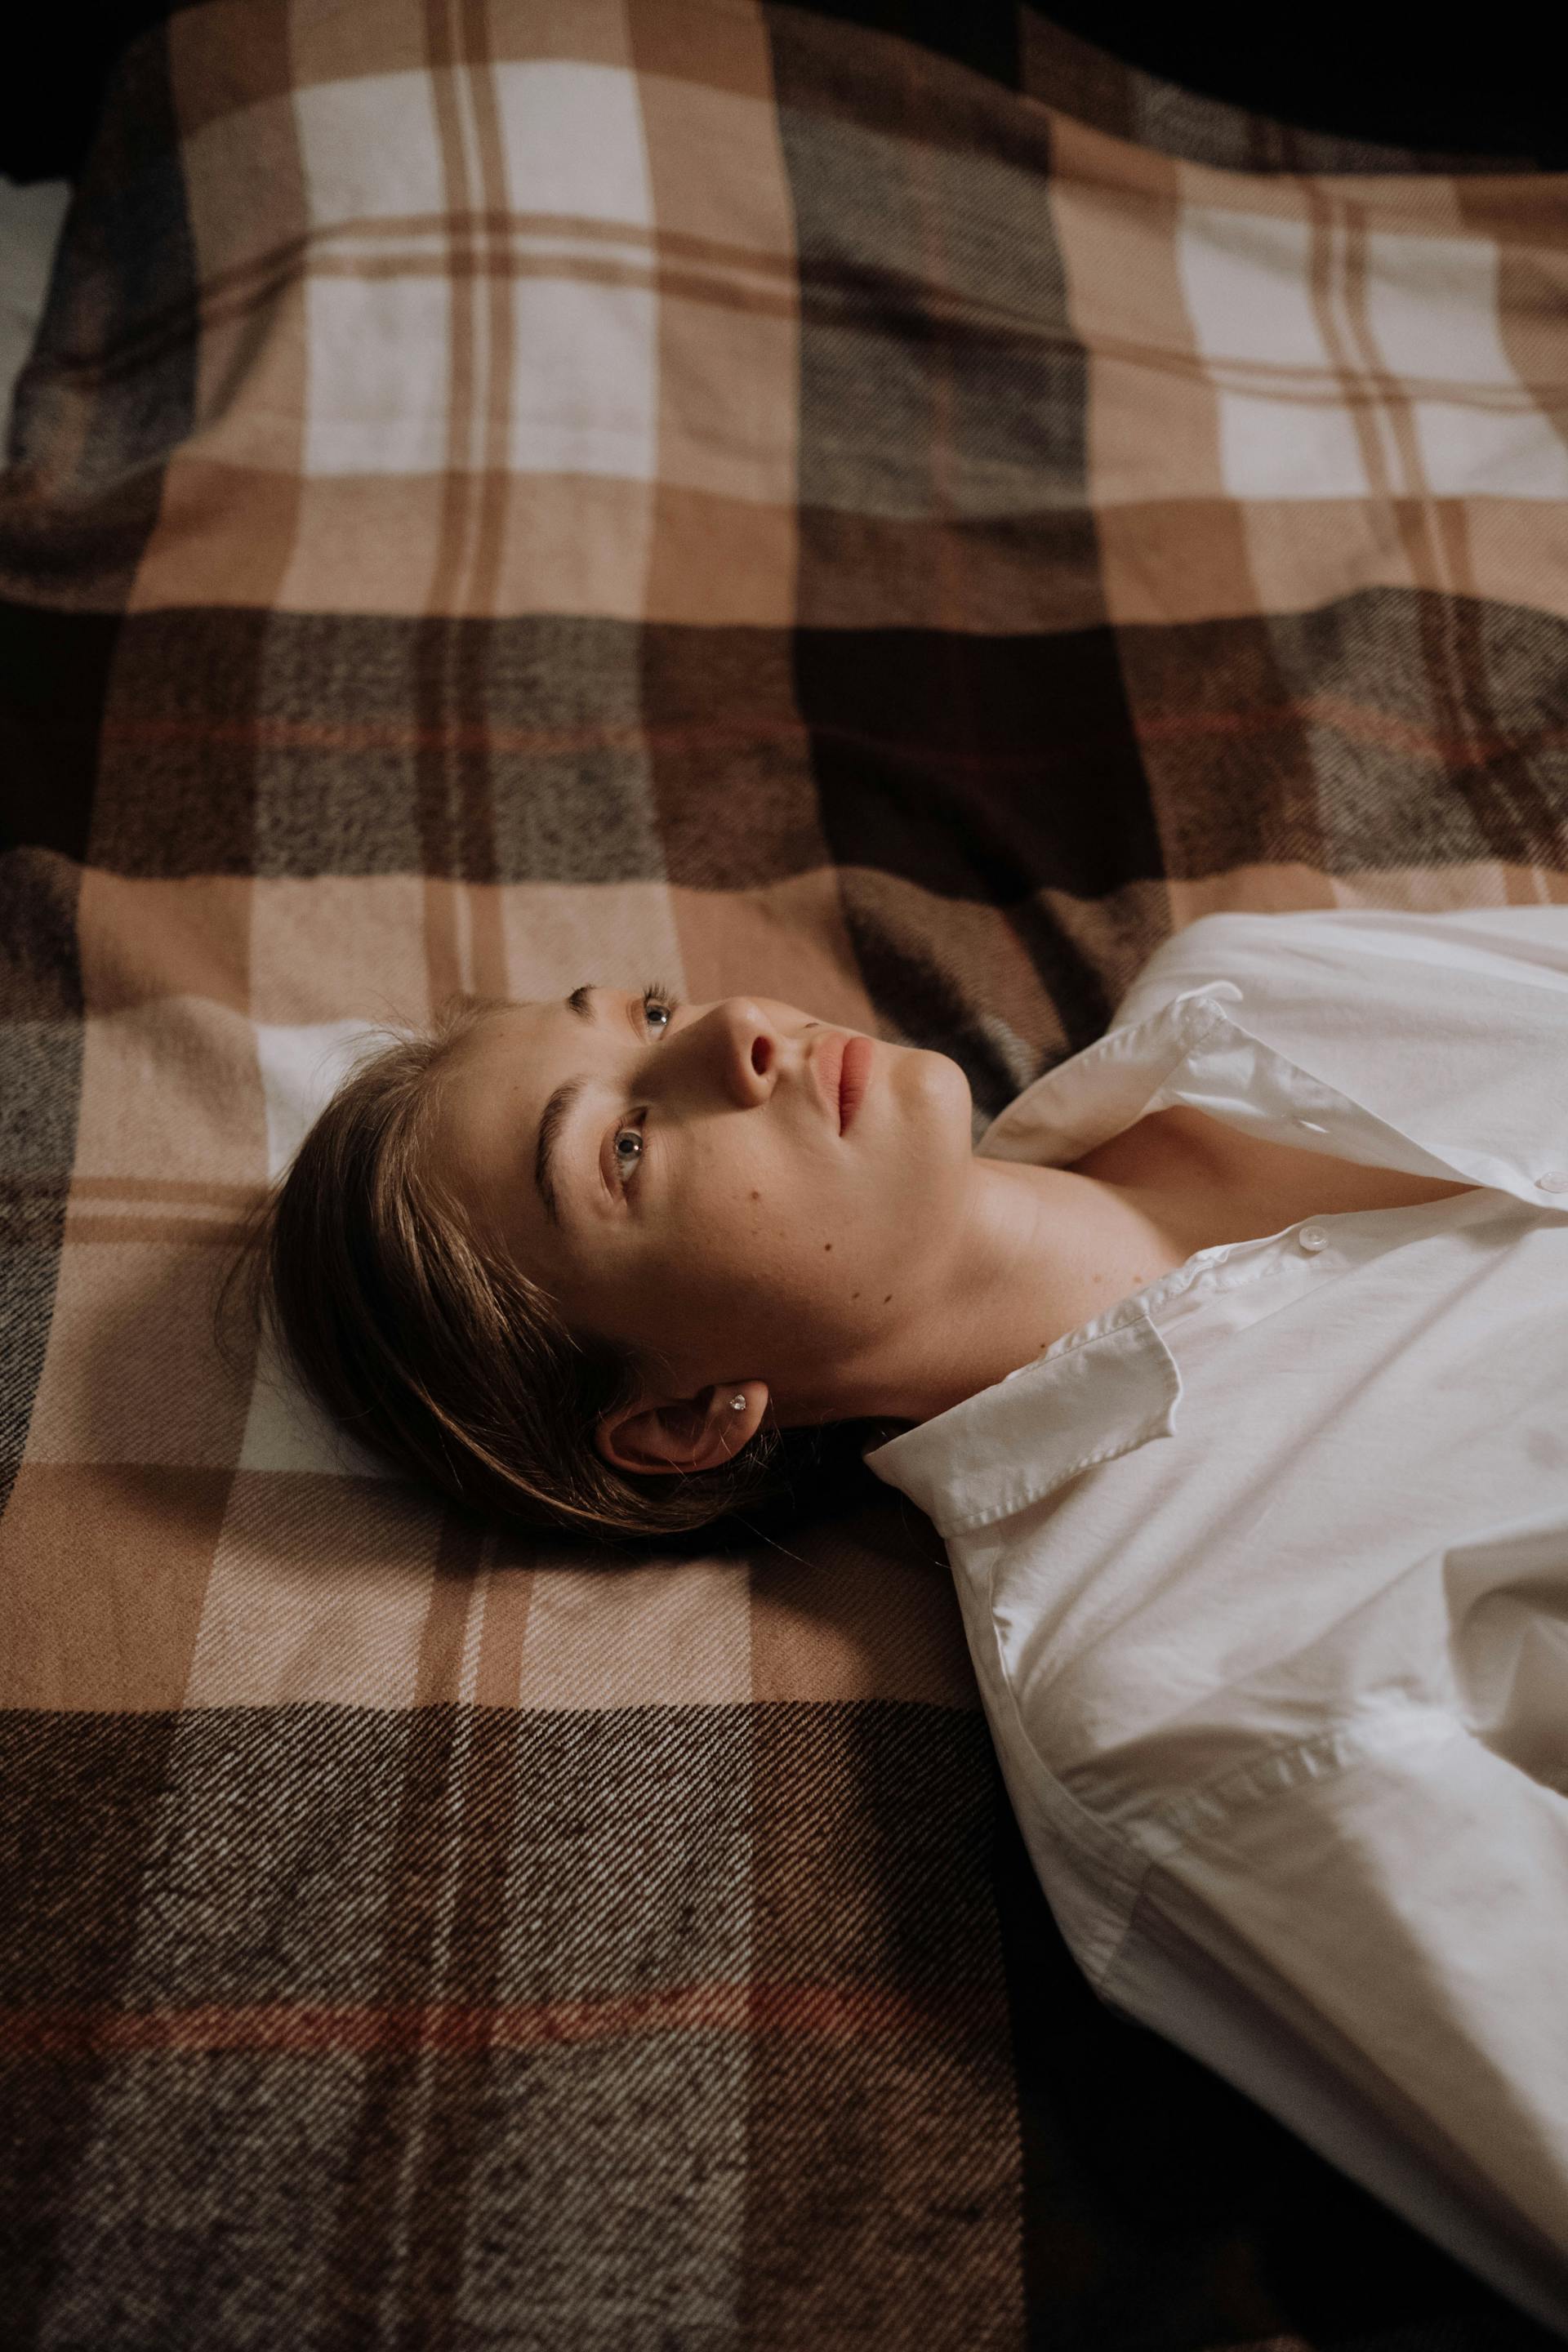 A woman lying awake in her bed | Source: Pexels